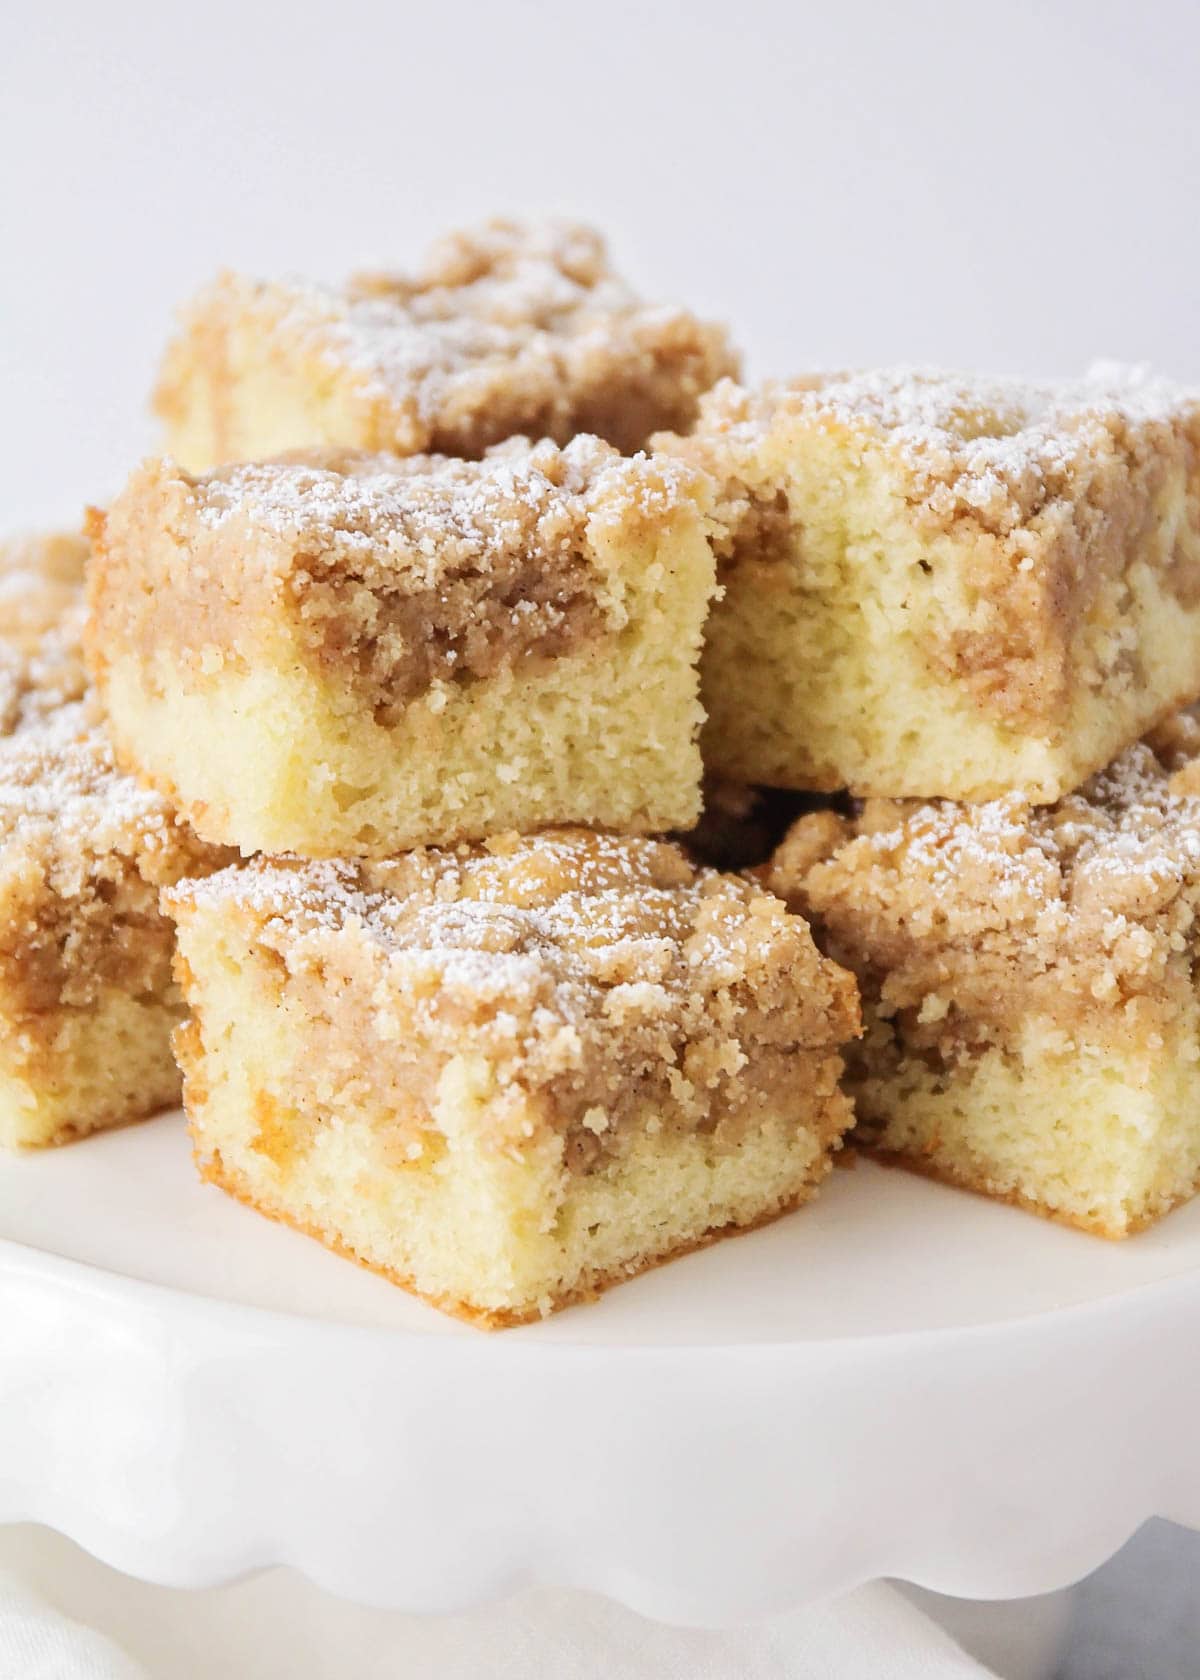 Slices of ny style crumb cake on a cake stand